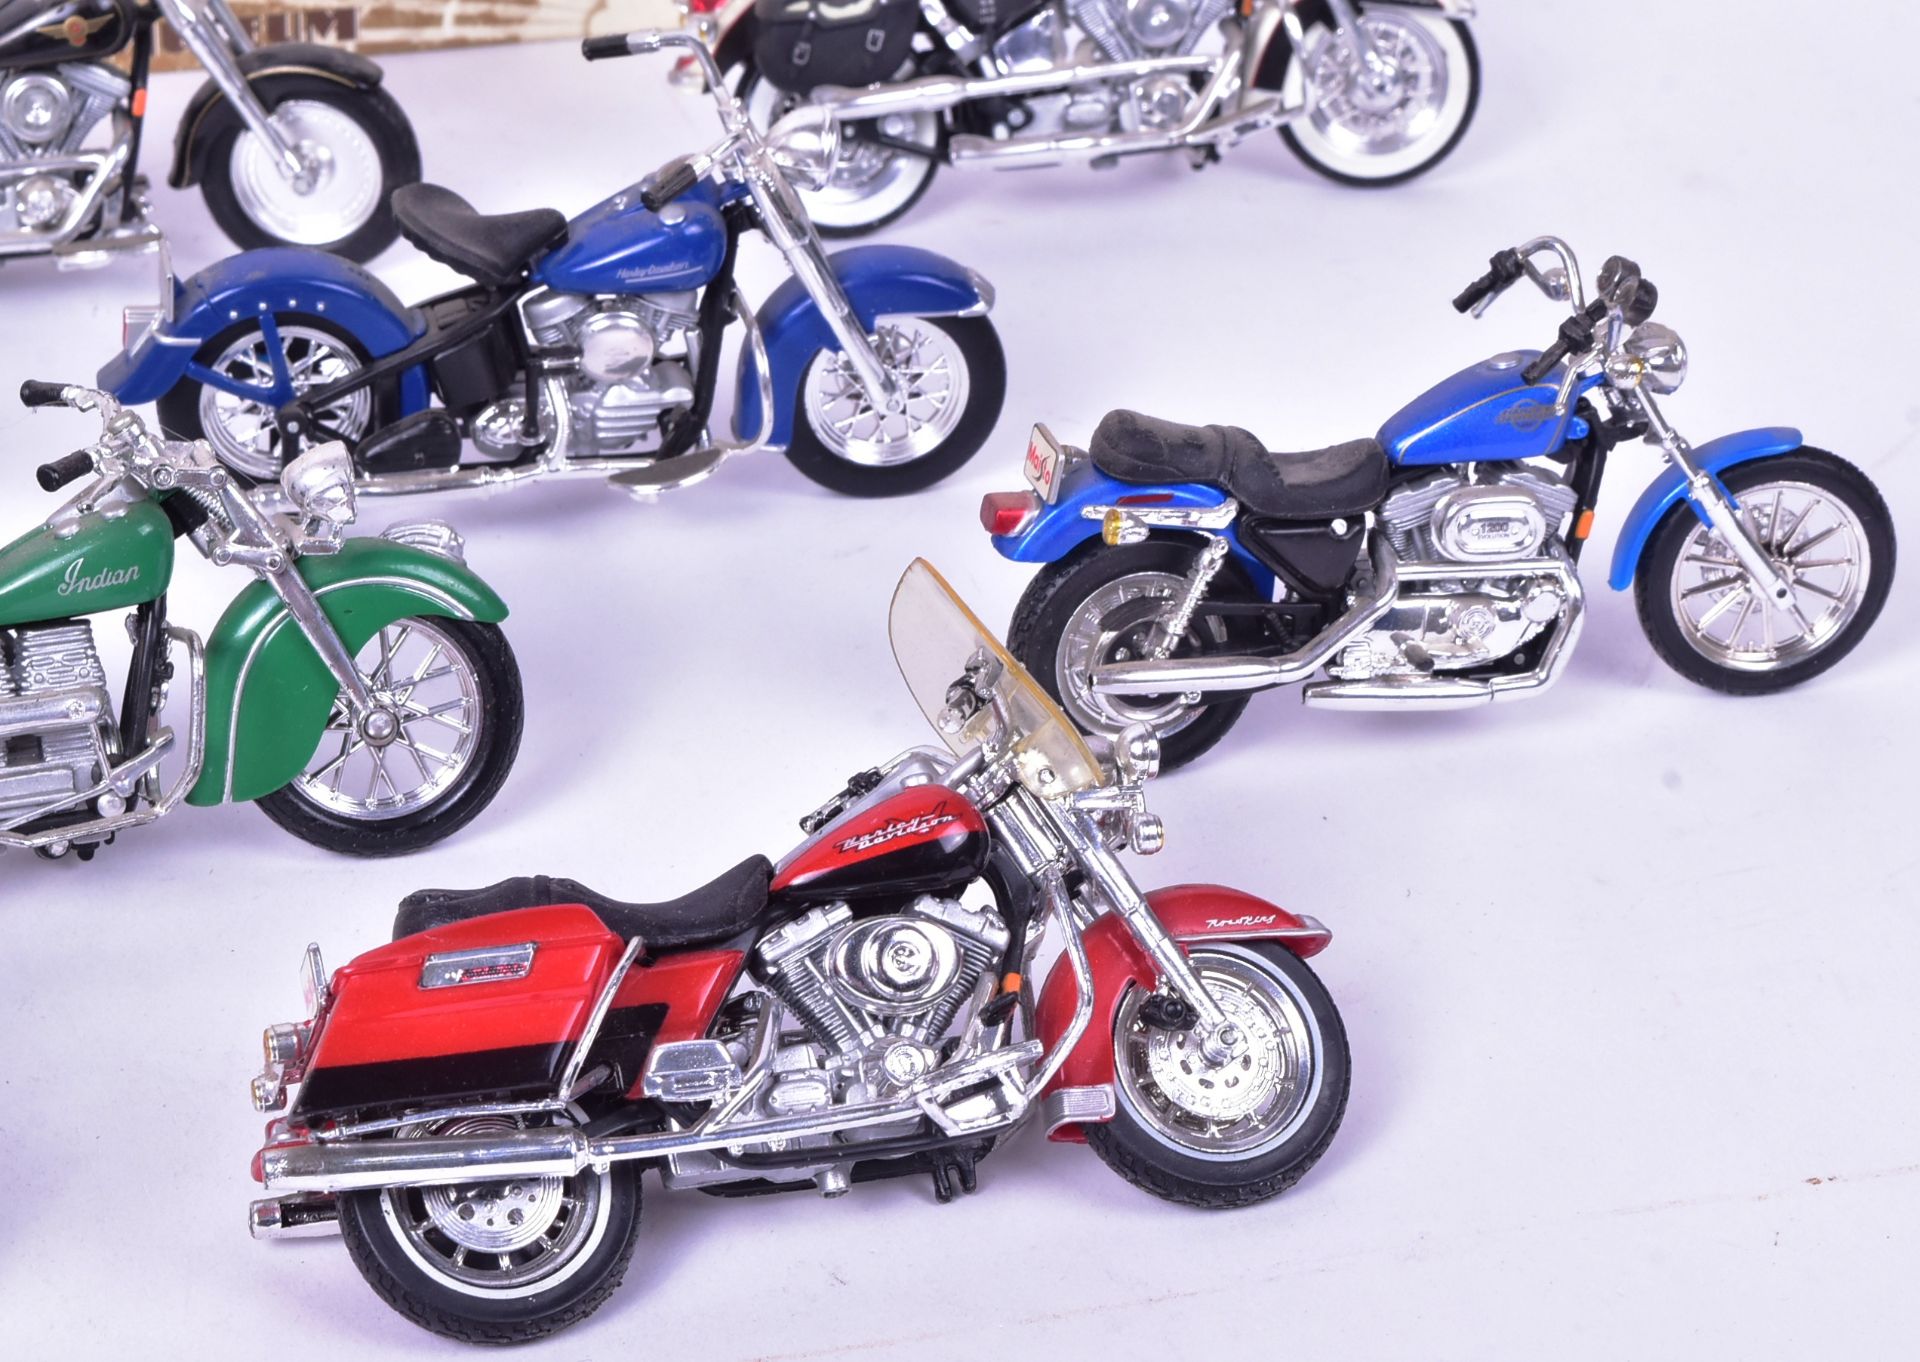 DIECAST - COLLECTION OF MOTORCYCLE MODELS - Image 6 of 7